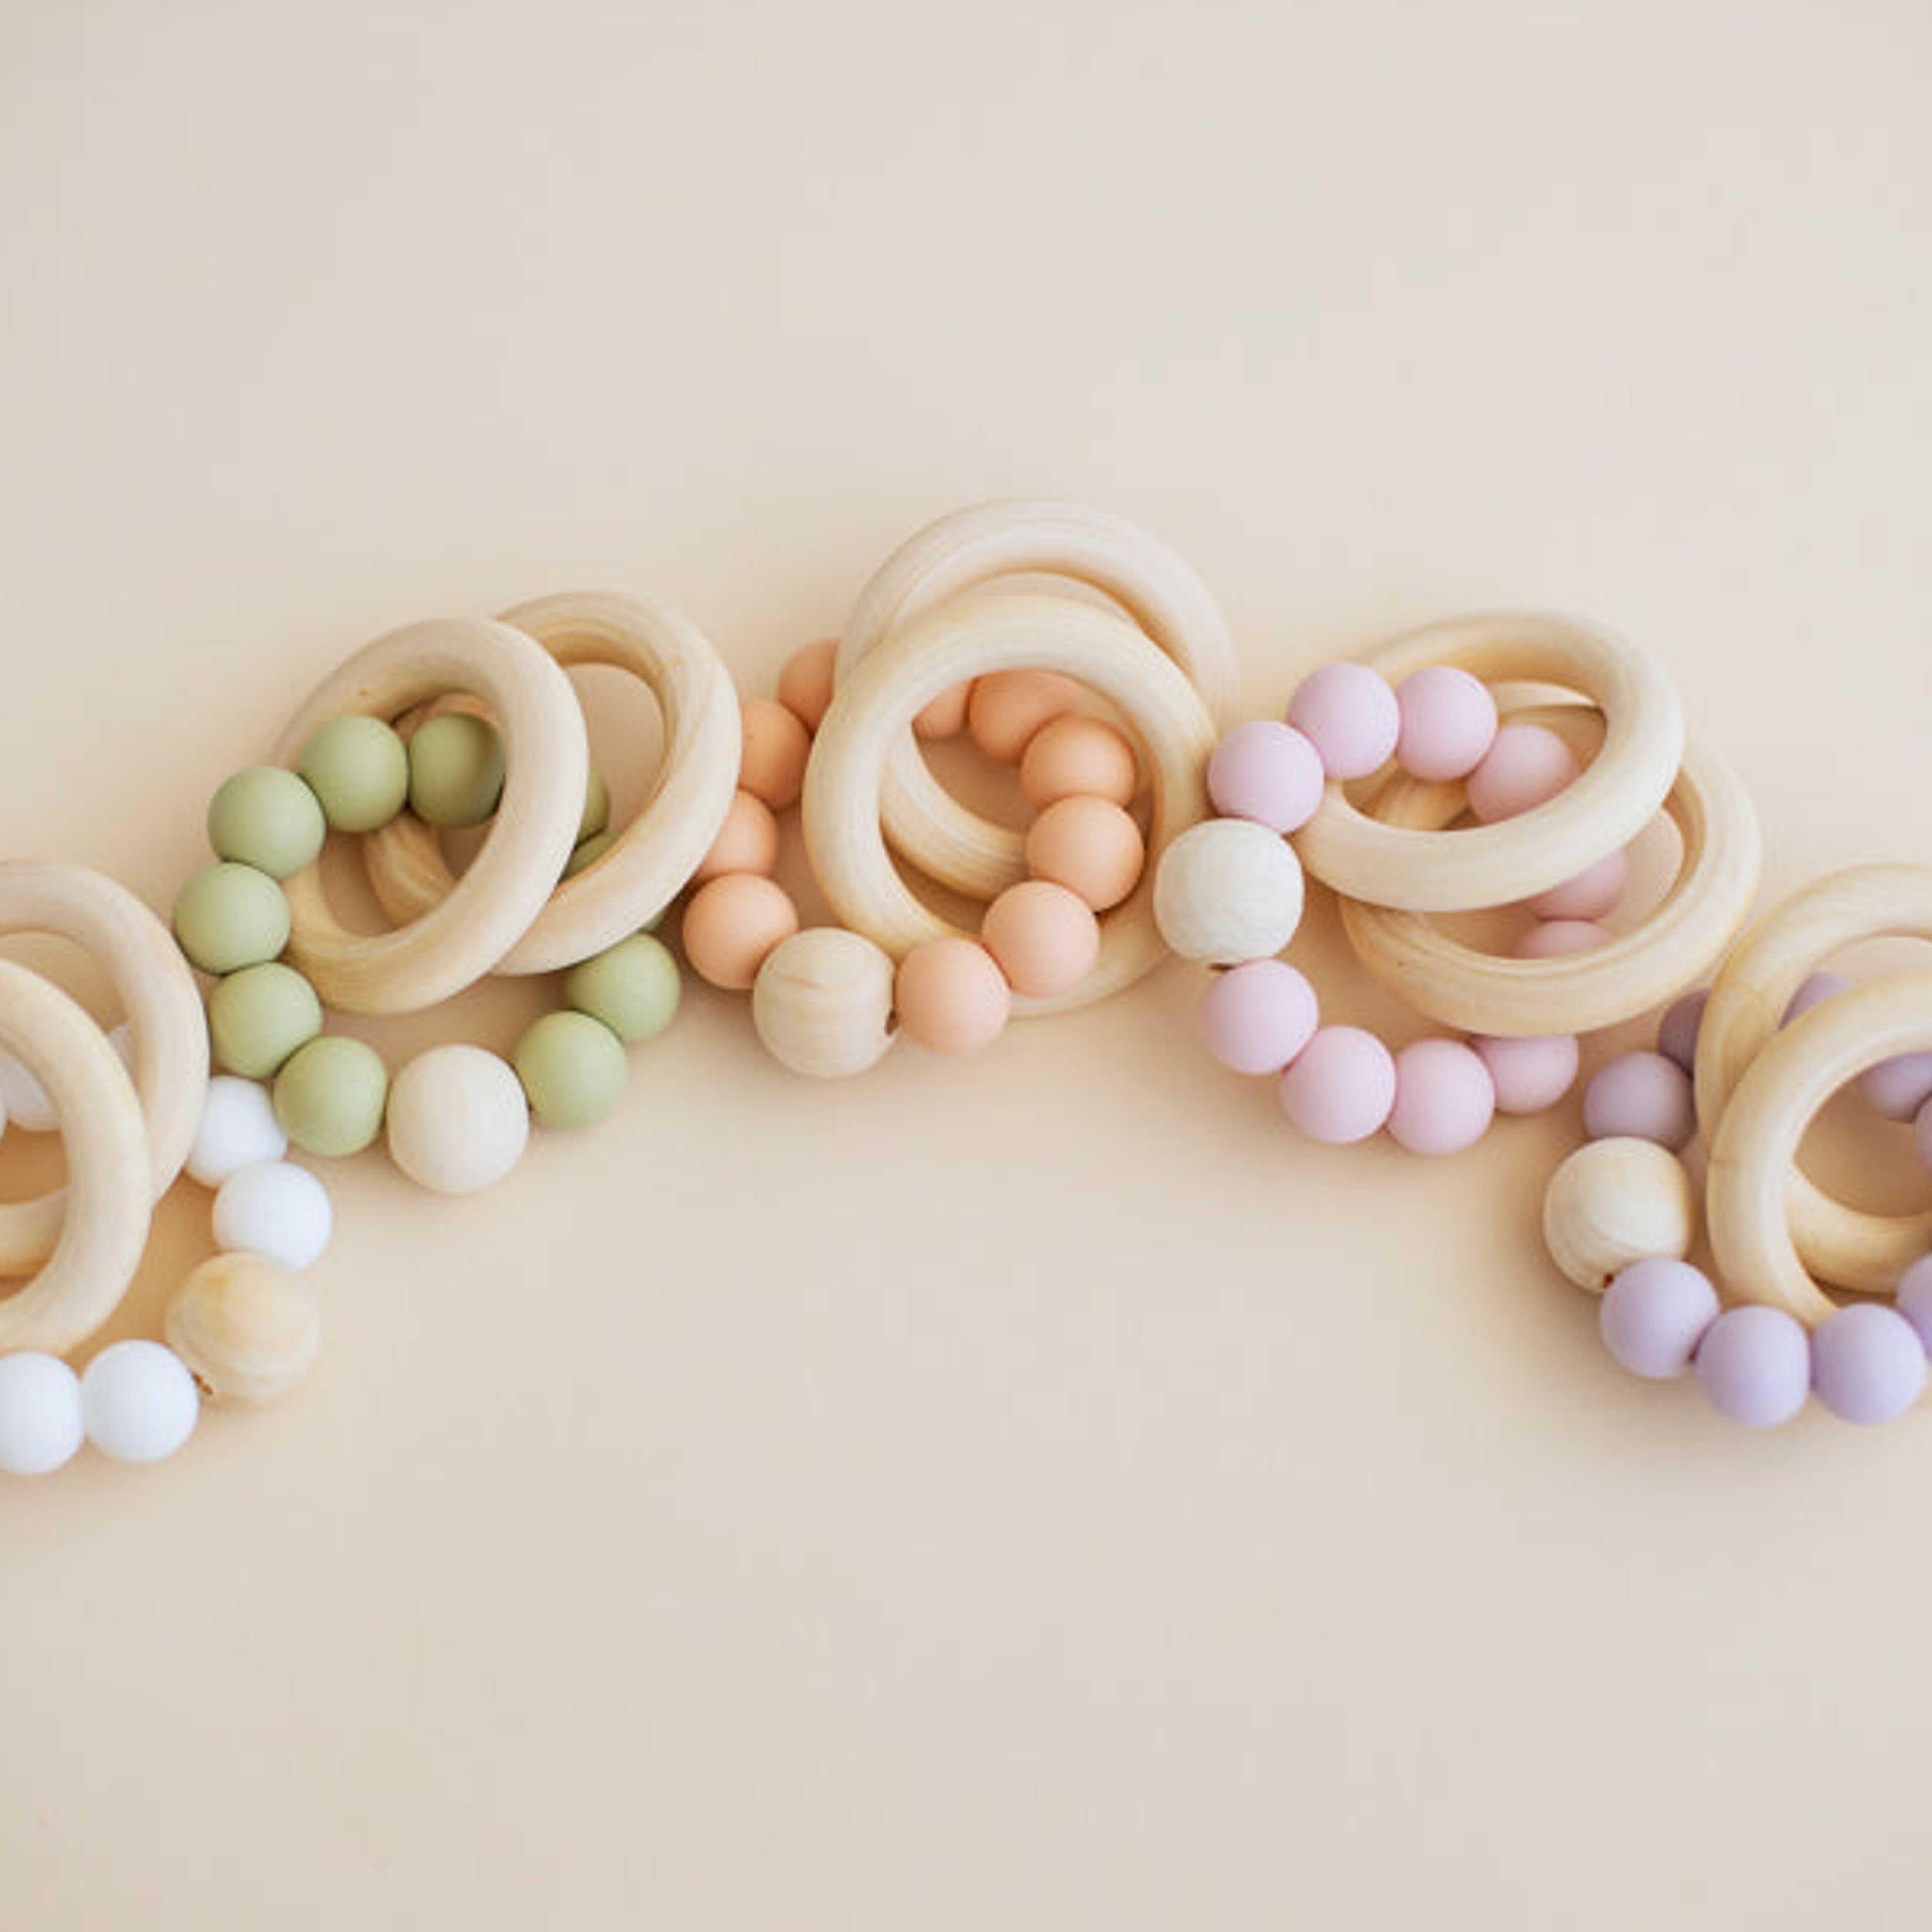 Silicone and Wood Ring Teething Toy | Soft Peach